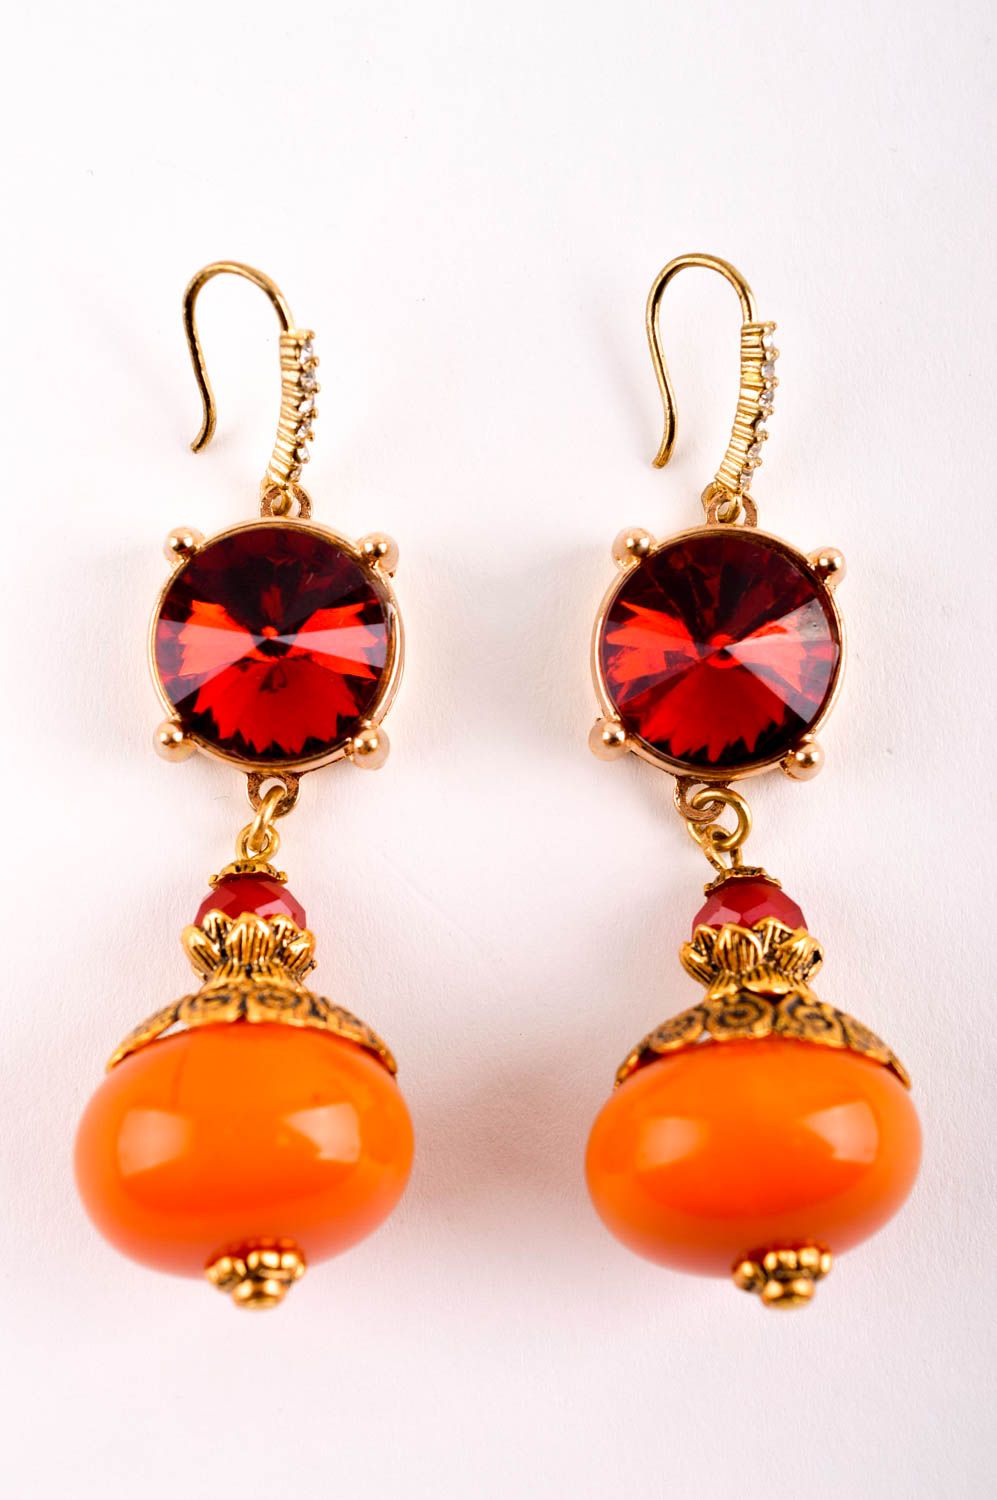 Handmade earrings summer accessories evening jewelry with natural stones photo 3